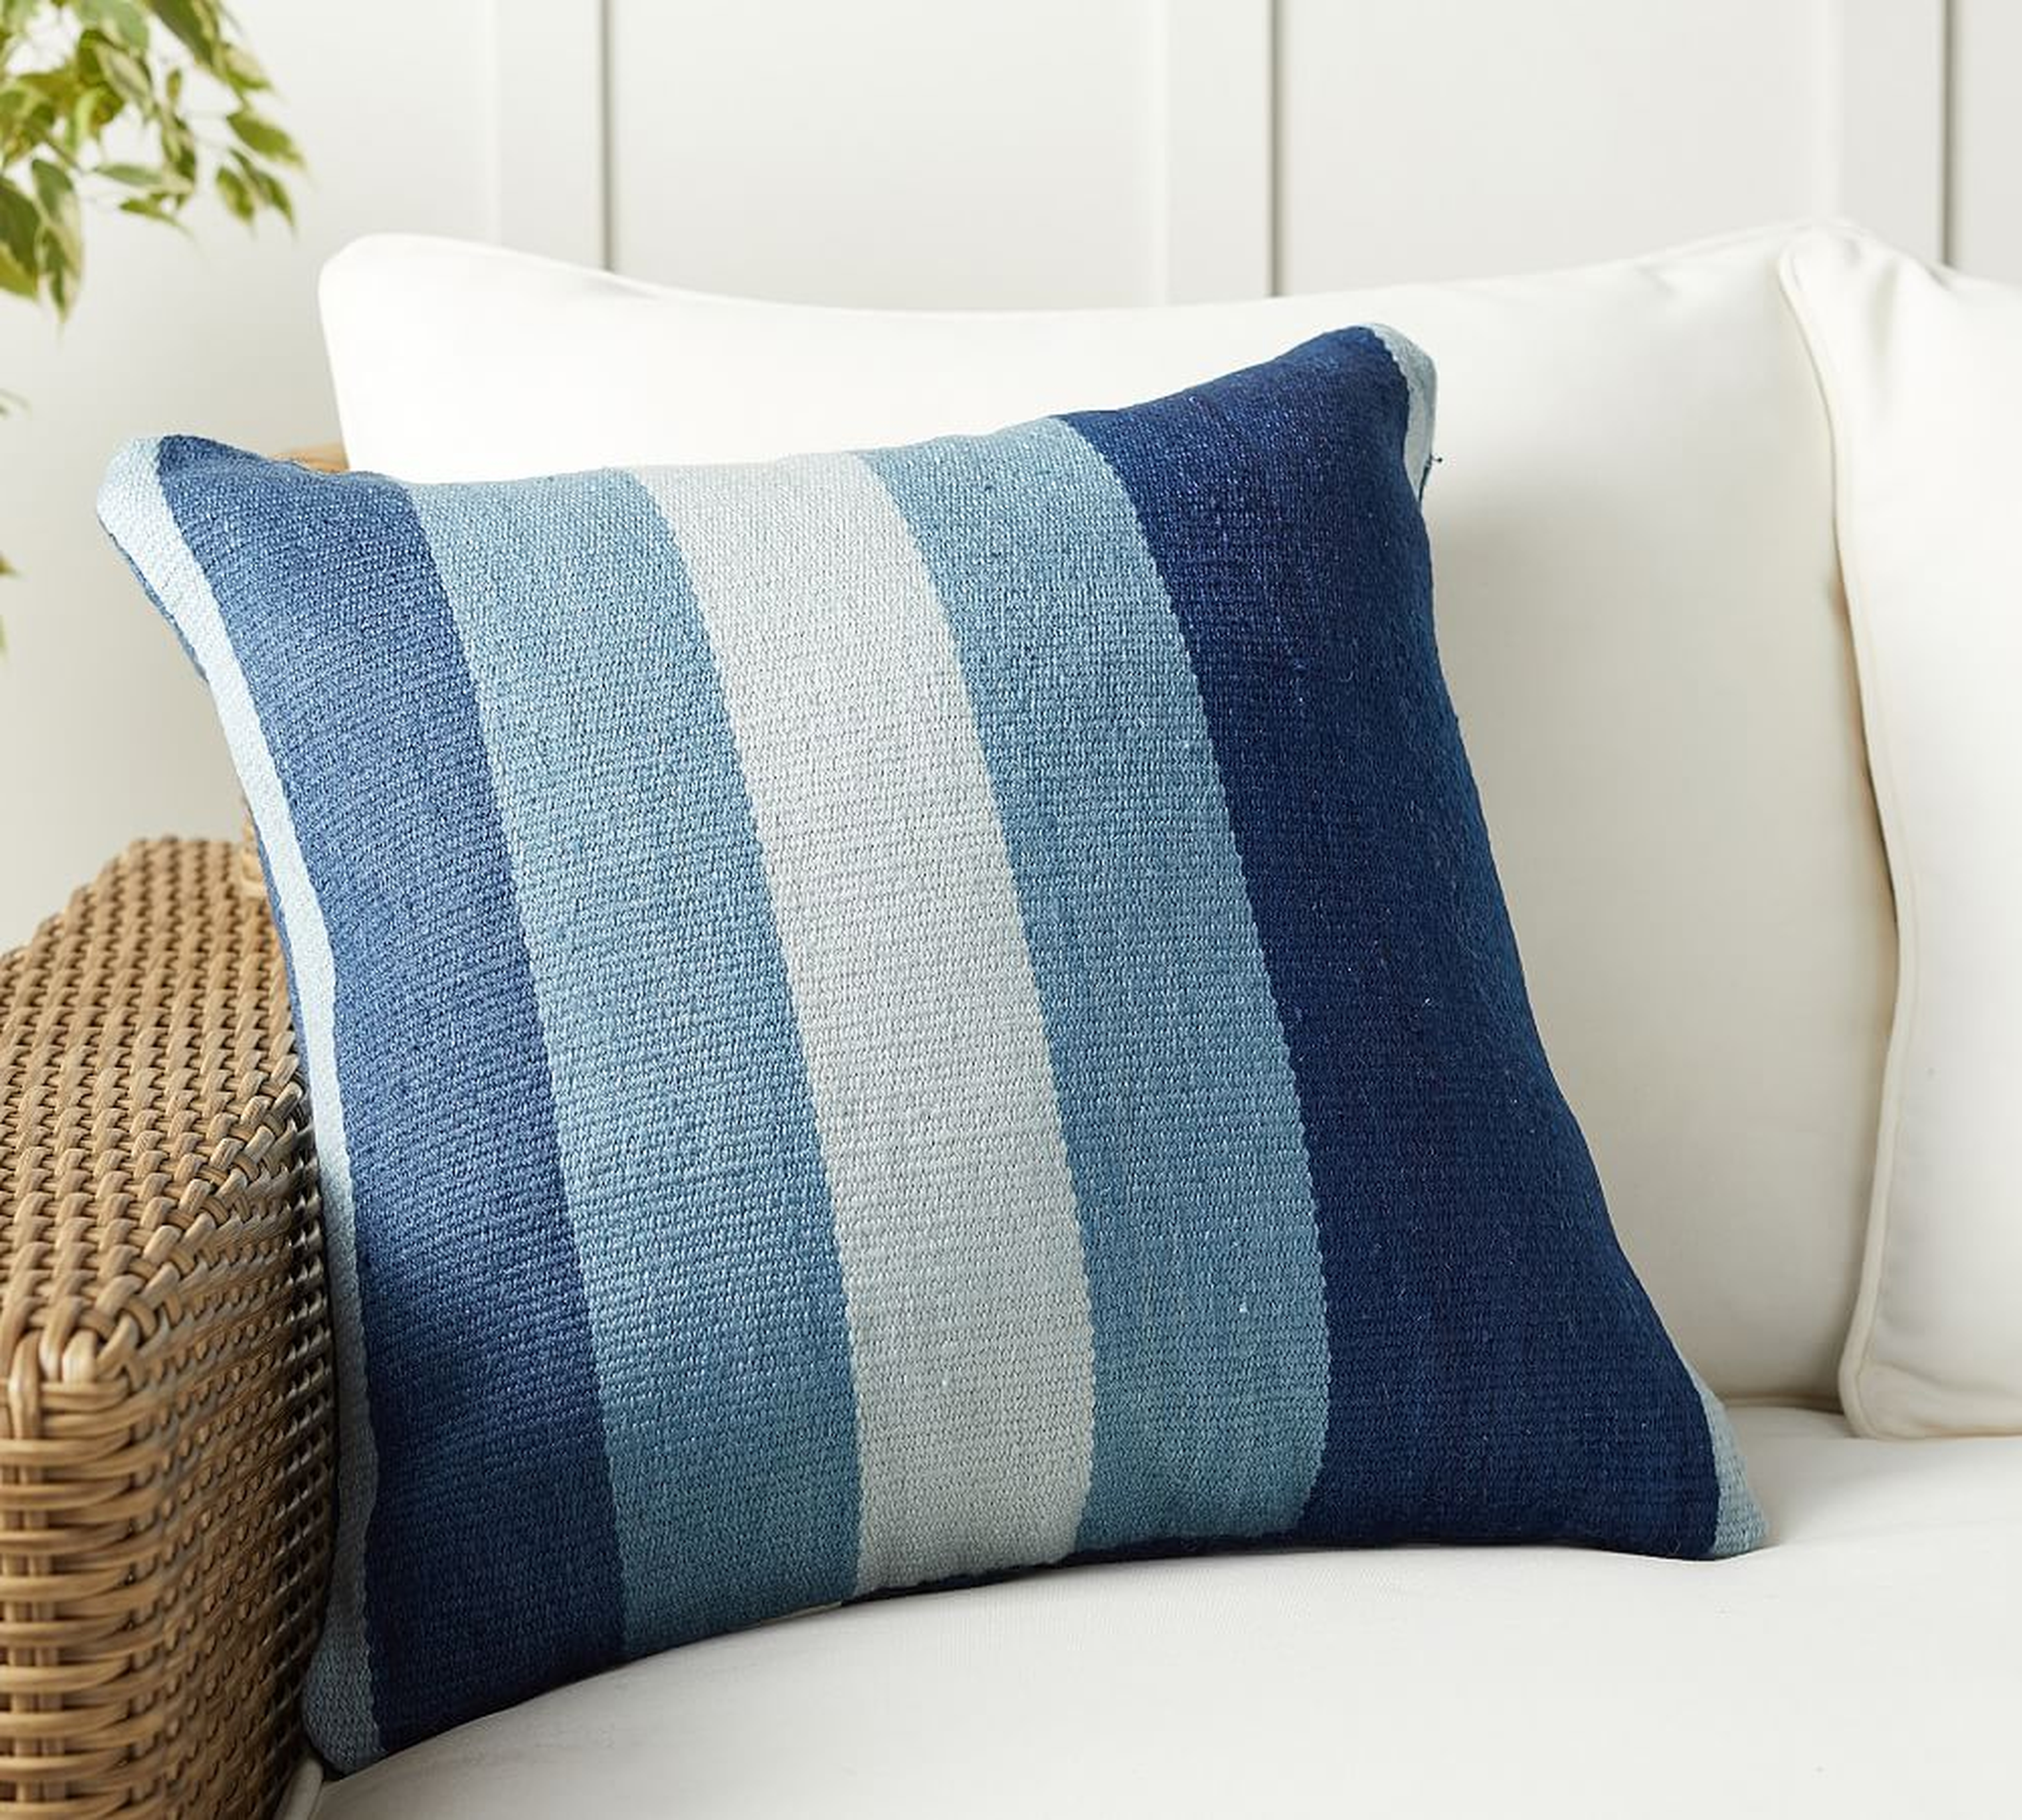 Lorne Eco-Friendly Indoor/Outdoor Pillow, 20 x 20", Blue Multi - Pottery Barn